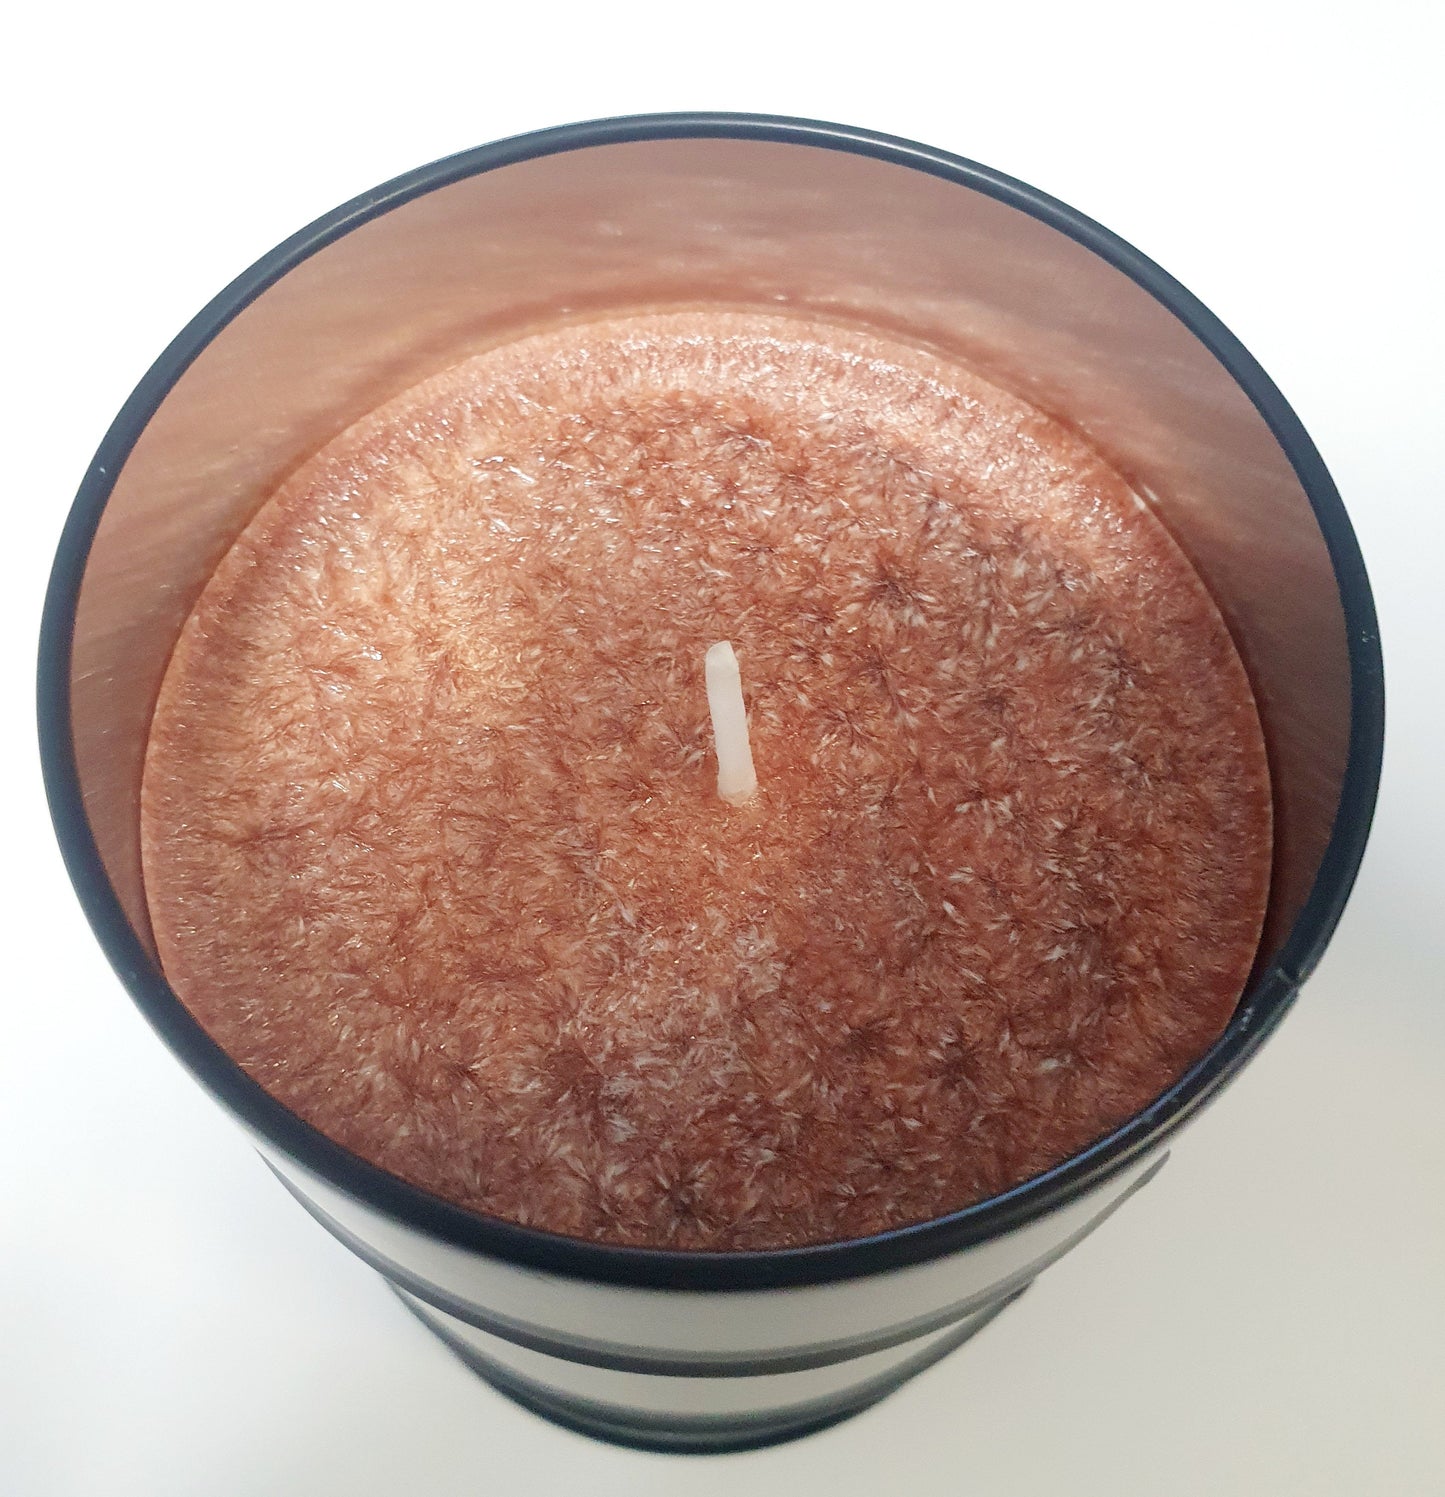 Mini 44 drum candle - choose your scent